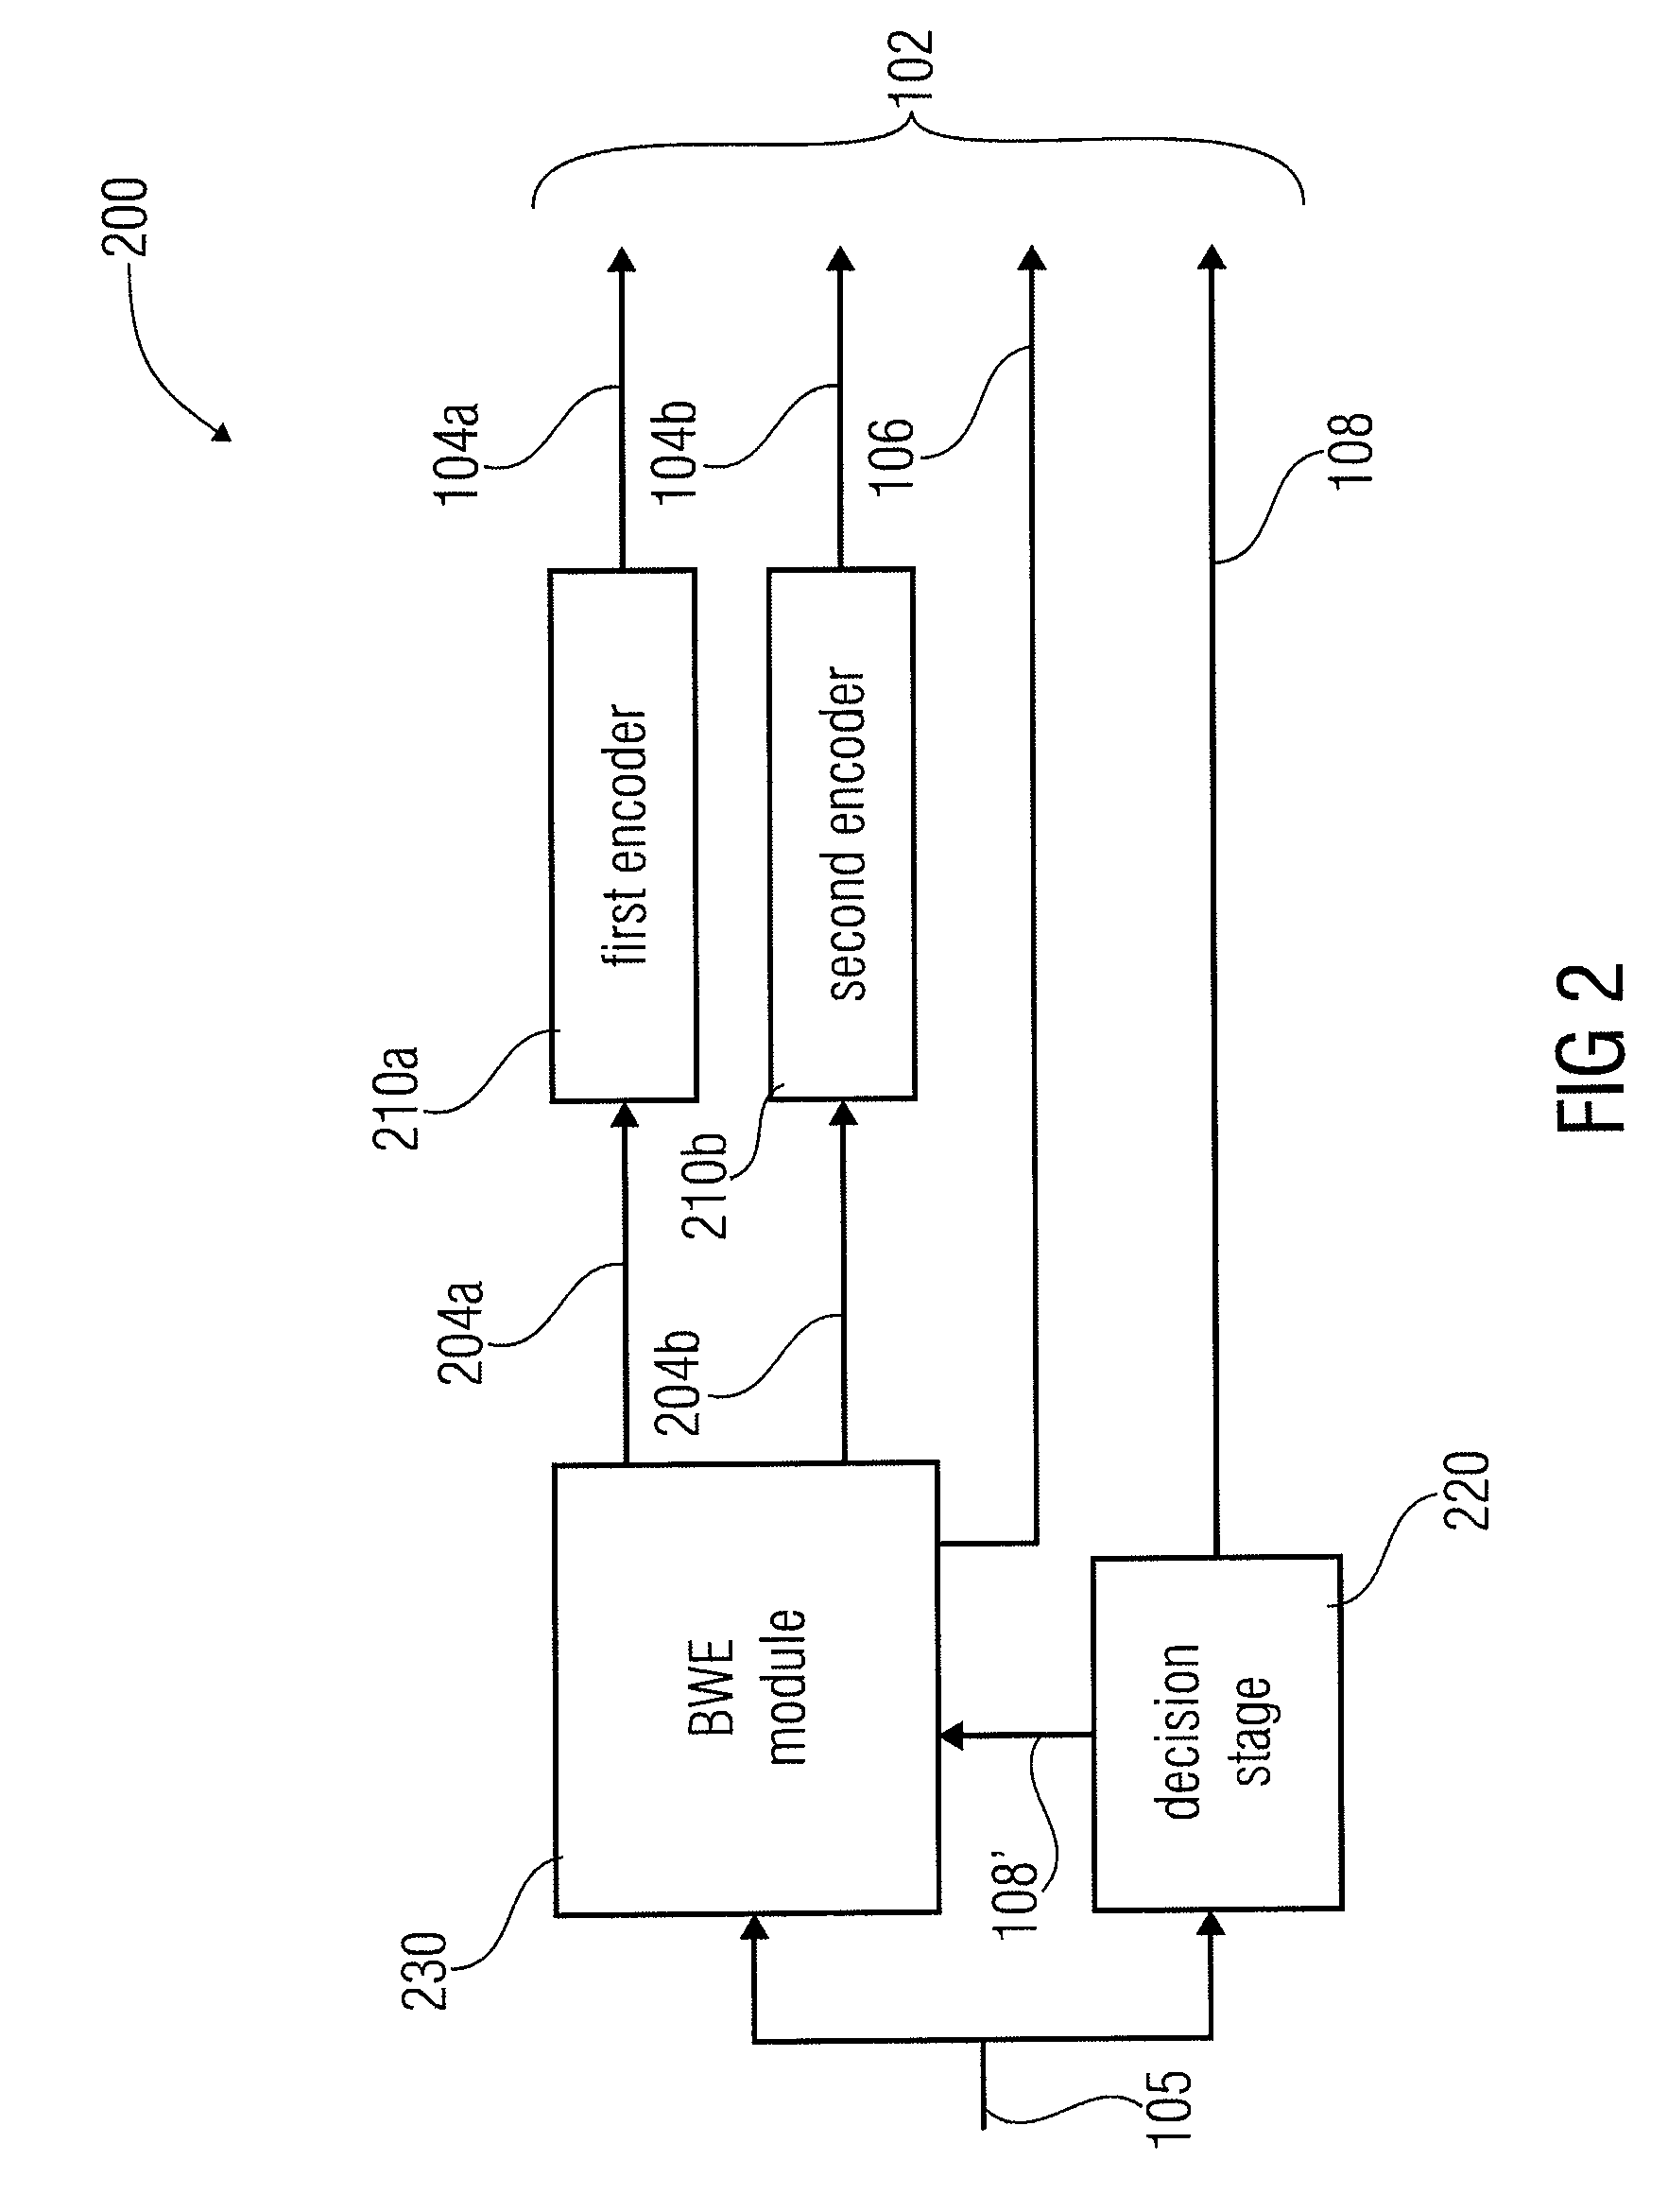 Apparatus and a method for decoding an encoded audio signal